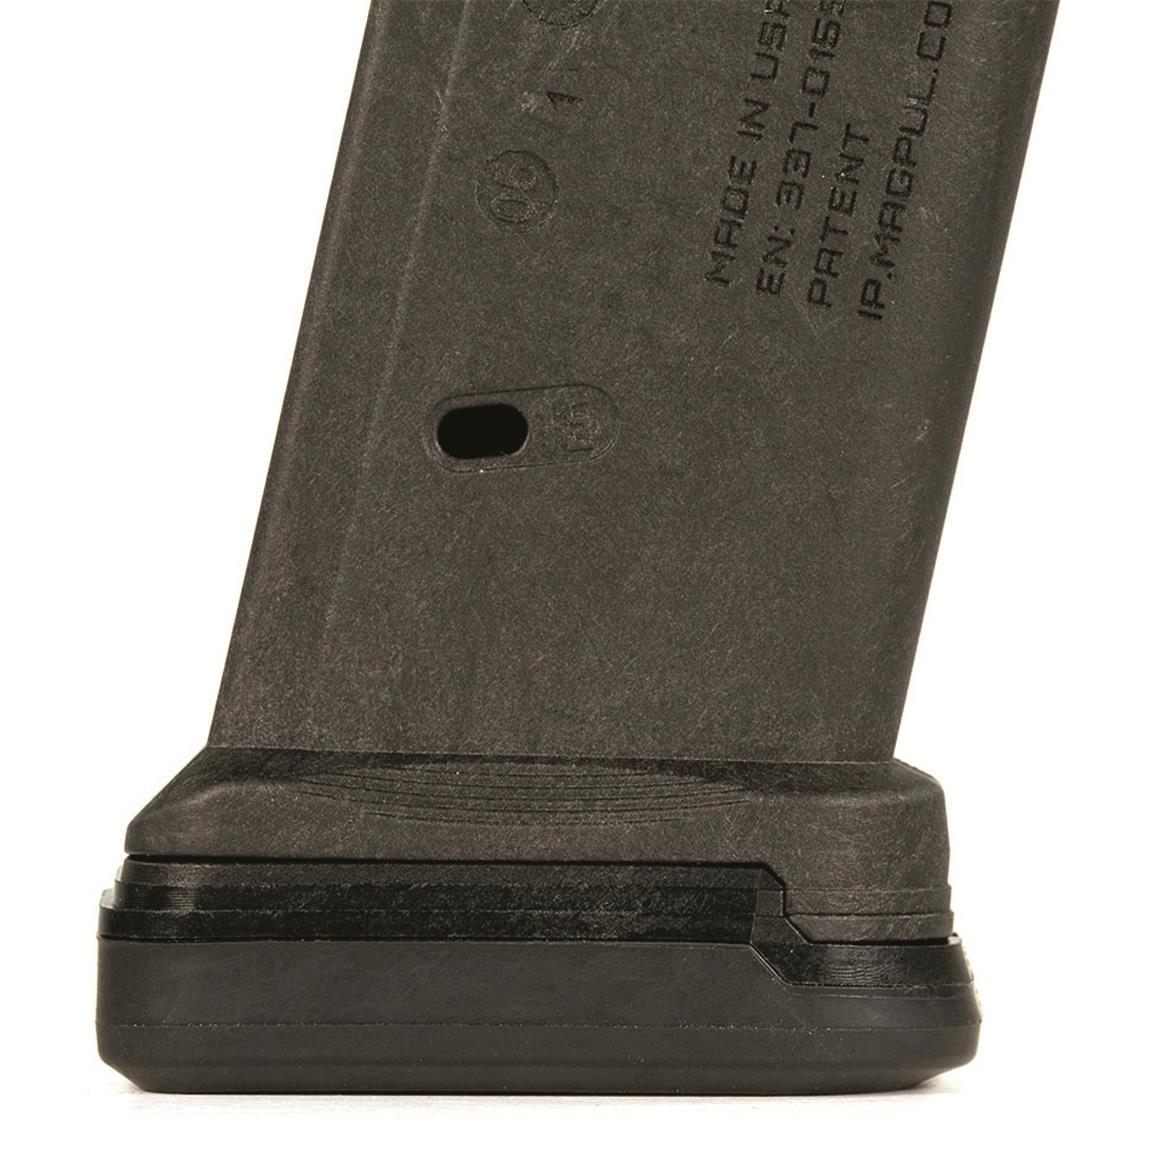 Magpul PMAG, 10 LR/SR Gen M3 Magazine, 7.62x51mm, 10 Rounds, Black -  705592, Rifle Mags at Sportsman's Guide